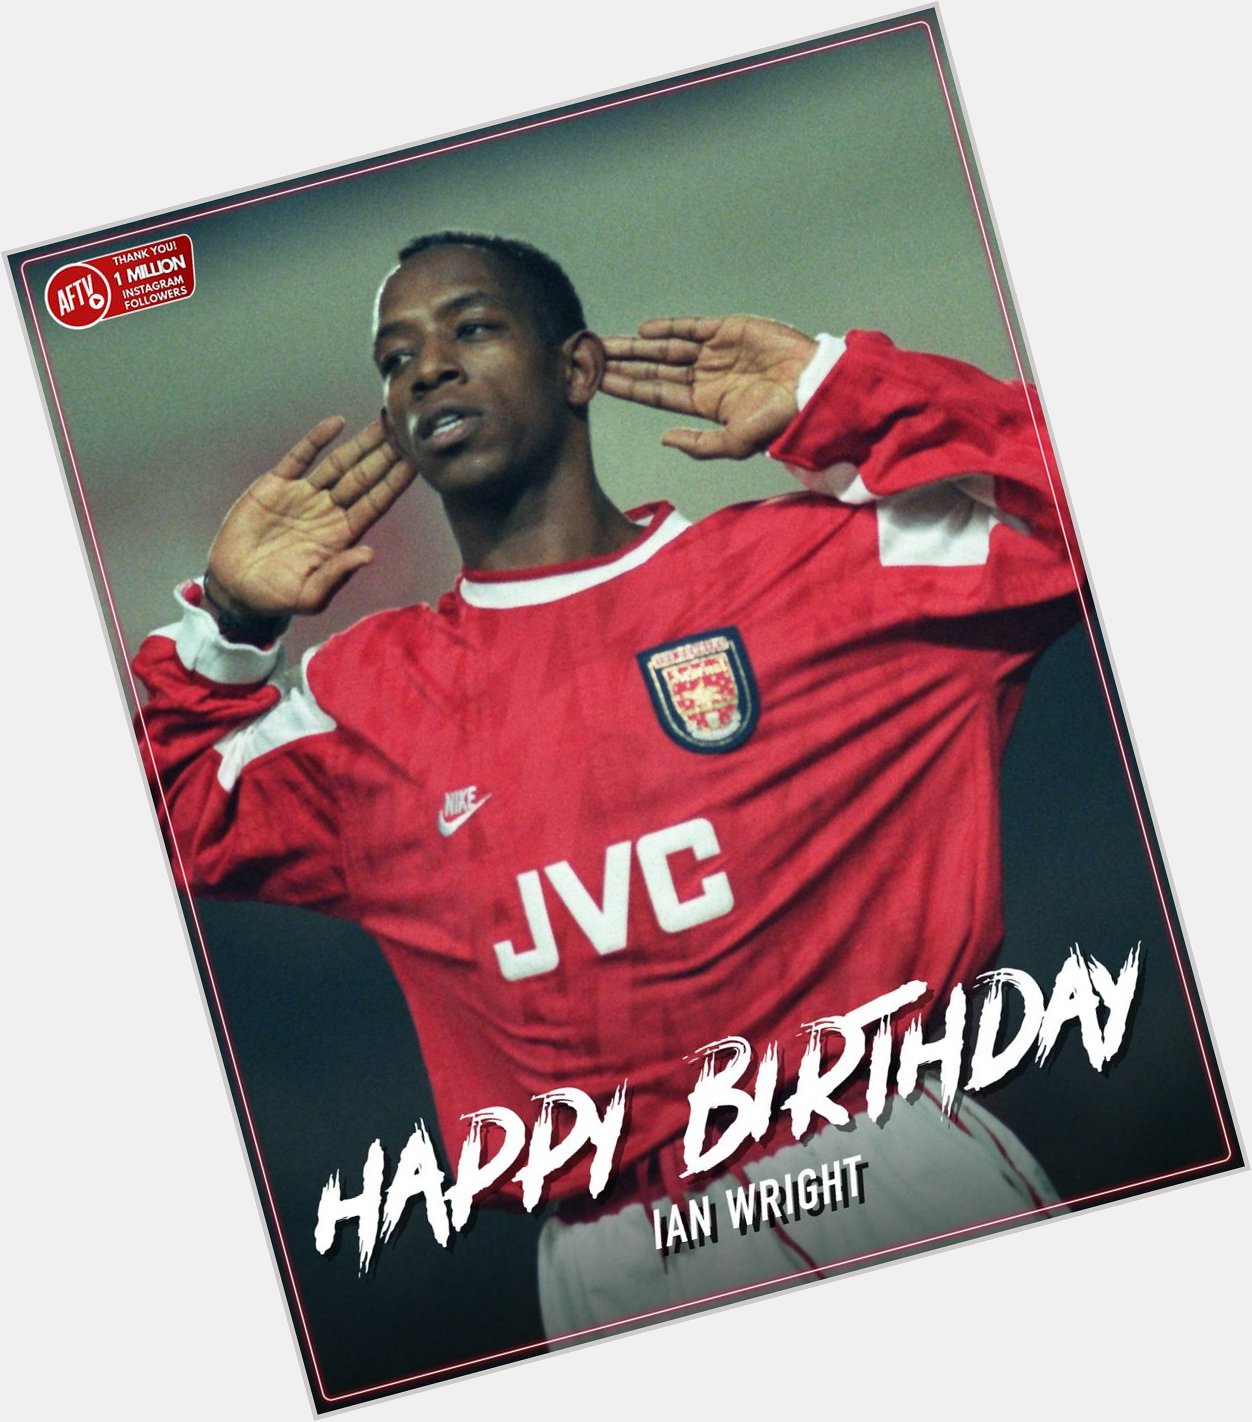 Happy birthday to the legend that is Ian Wright!    